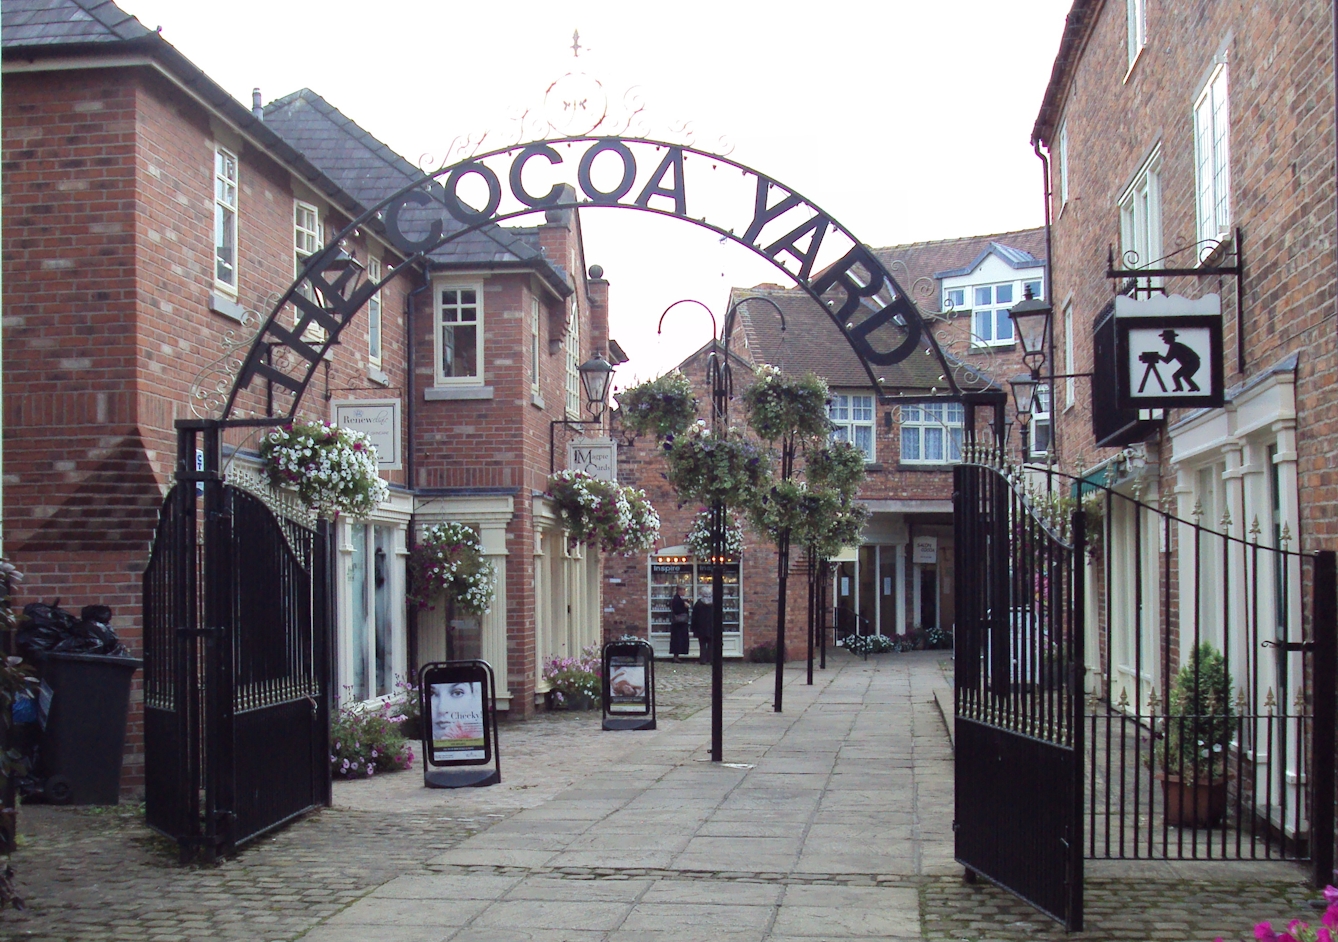 Colour photograph showing the entrance to The Cocoa Yard in Cheshire, with a metal sign arching over the gap.